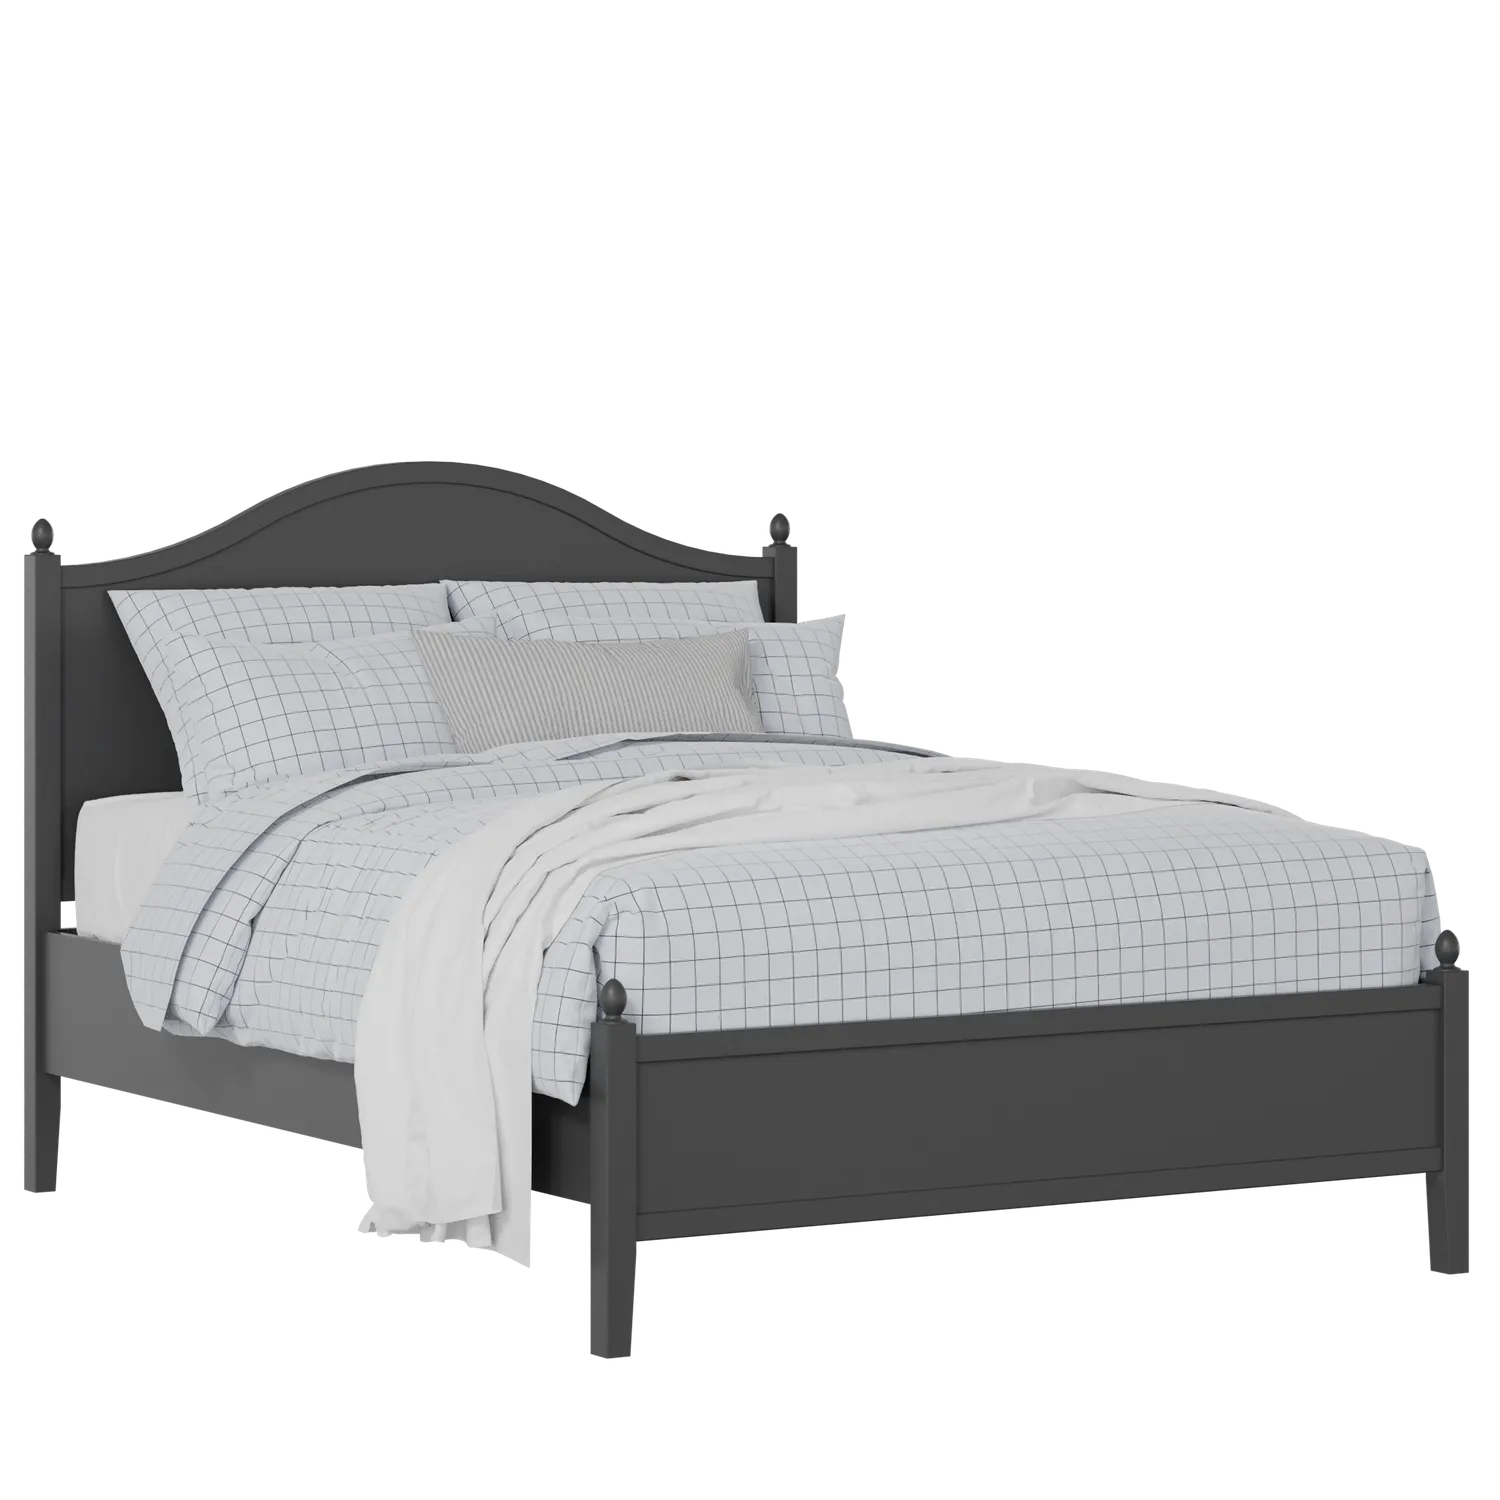 Brady Slim painted wood bed in black with Juno mattress